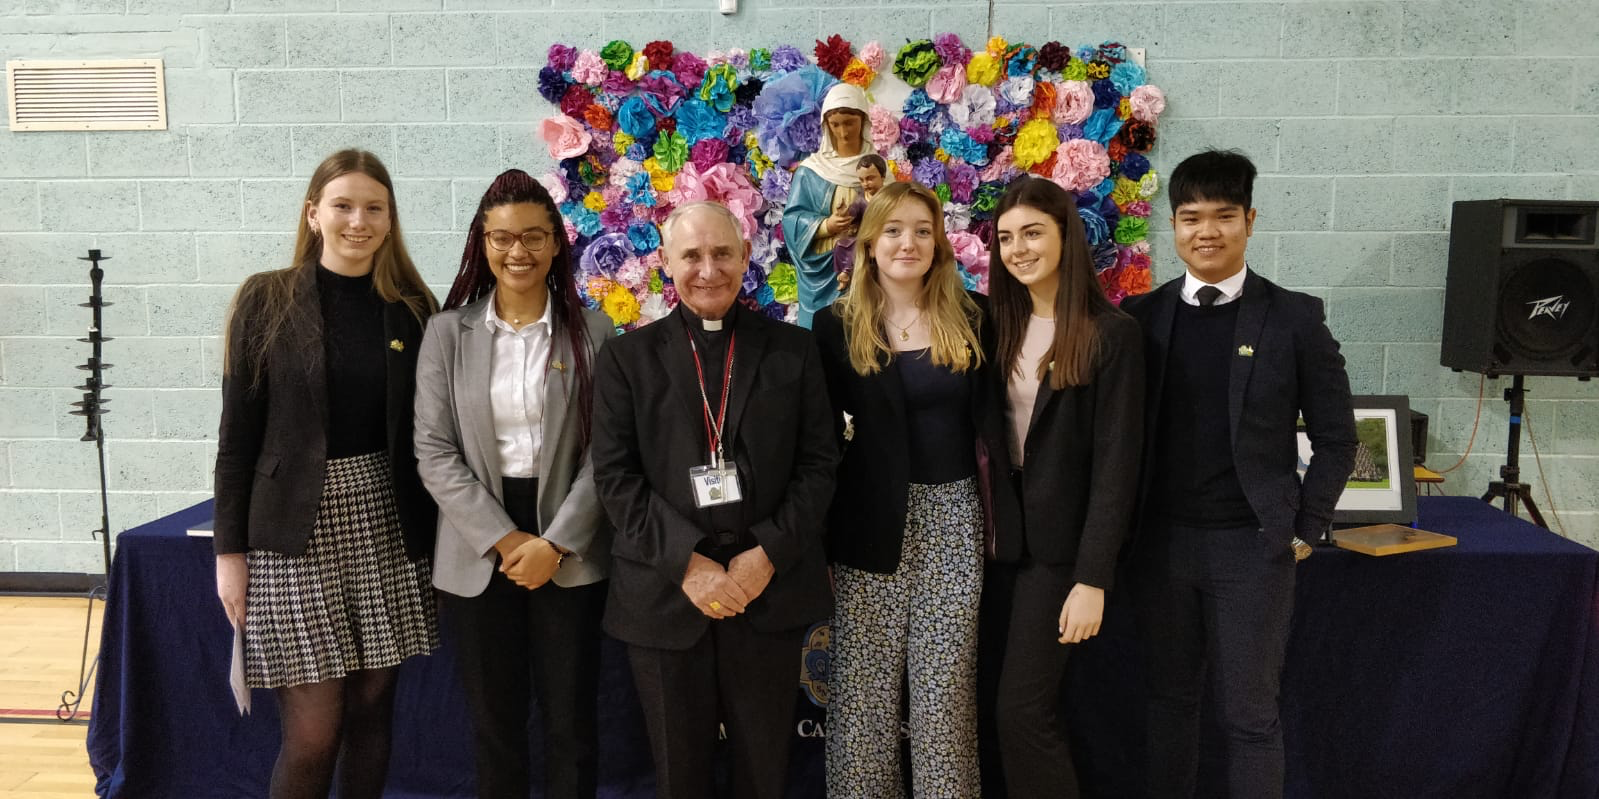 St Mary's Catholic School celebrates 125 years - Diocese of Westminster